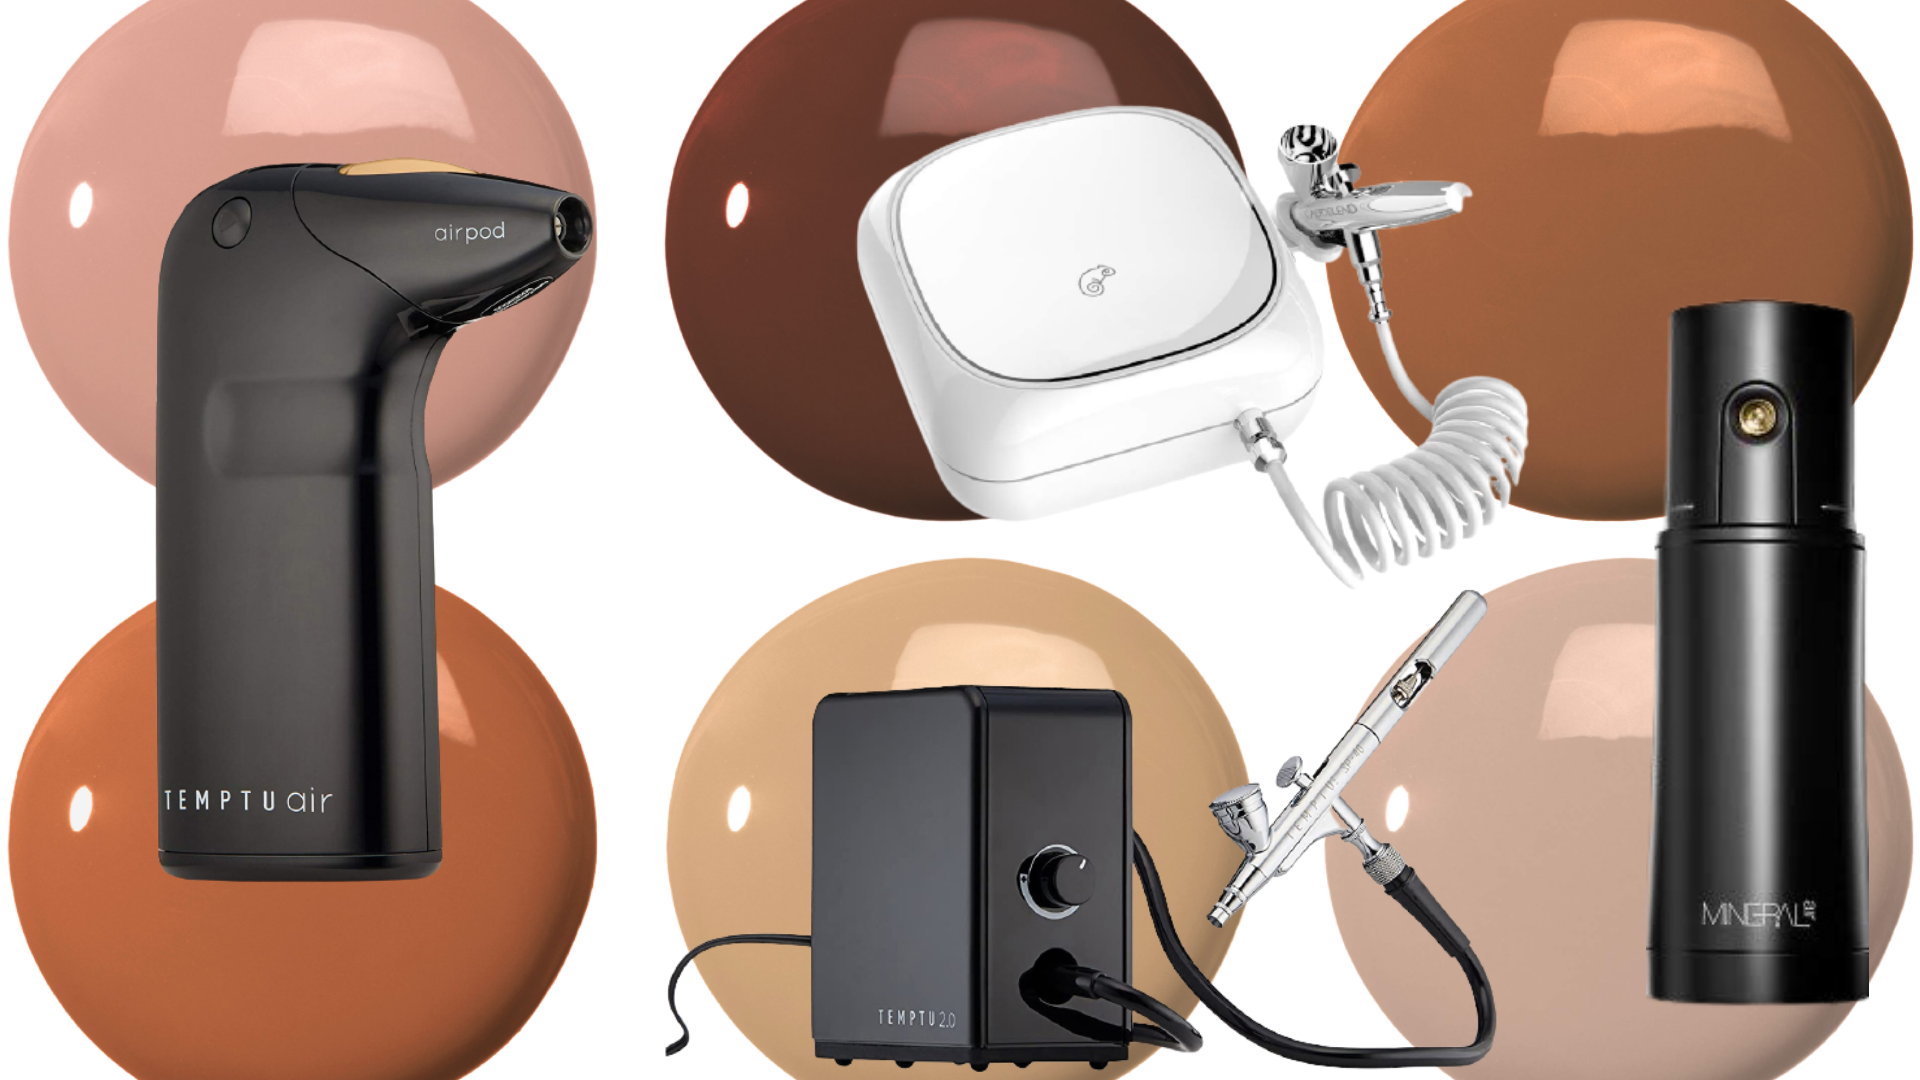 10 Best Airbrush Makeup Kits to Try